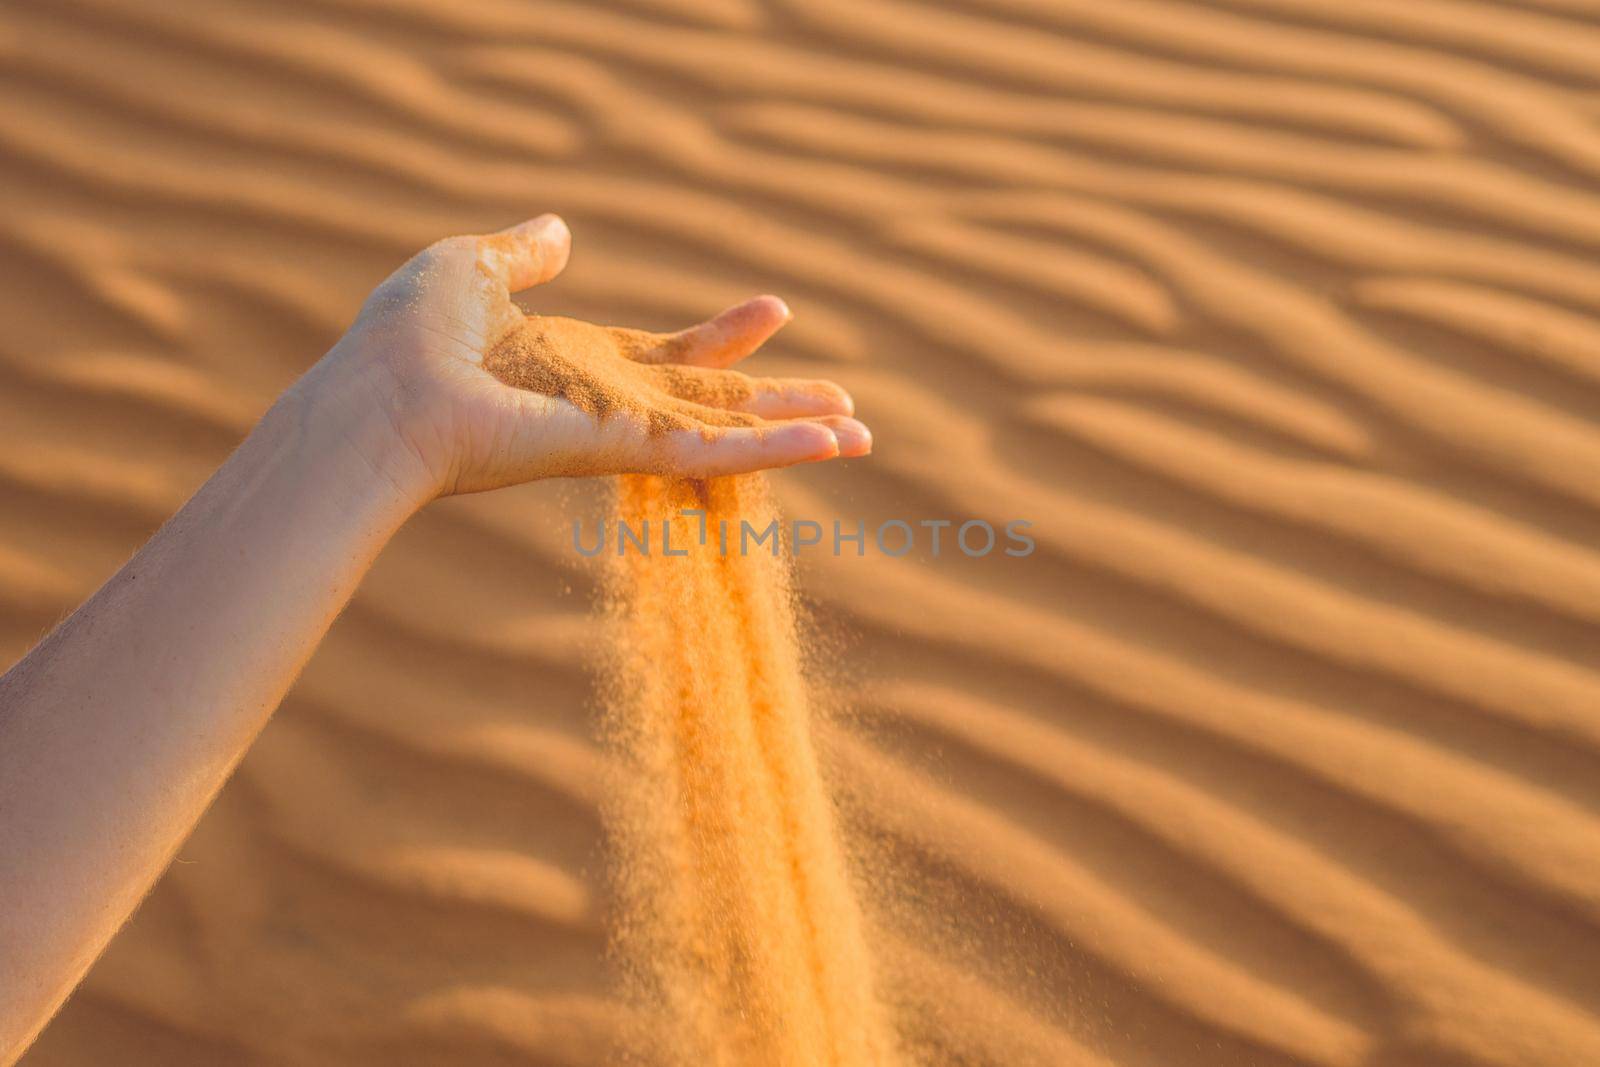 Sand slipping through the fingers of a woman's hand in the desert.